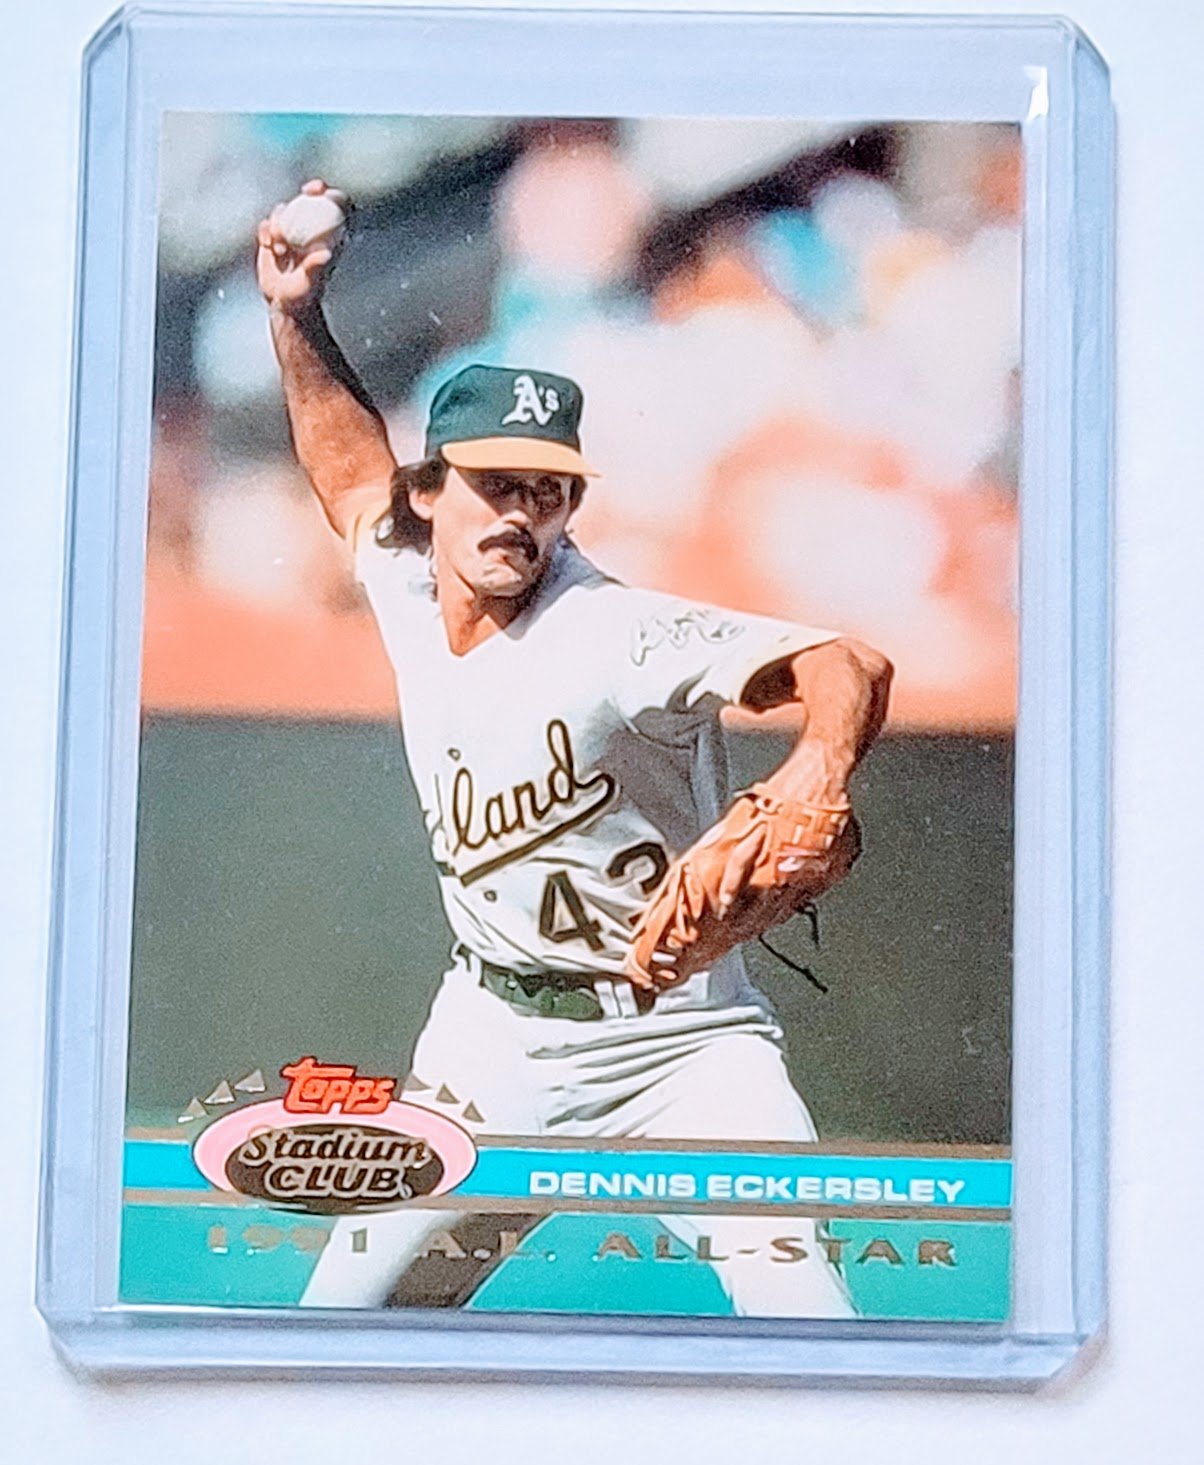 1992 Topps Stadium Club Dome Dennis Eckersley 1991 All Star MLB Baseball Trading Card TPTV simple Xclusive Collectibles   